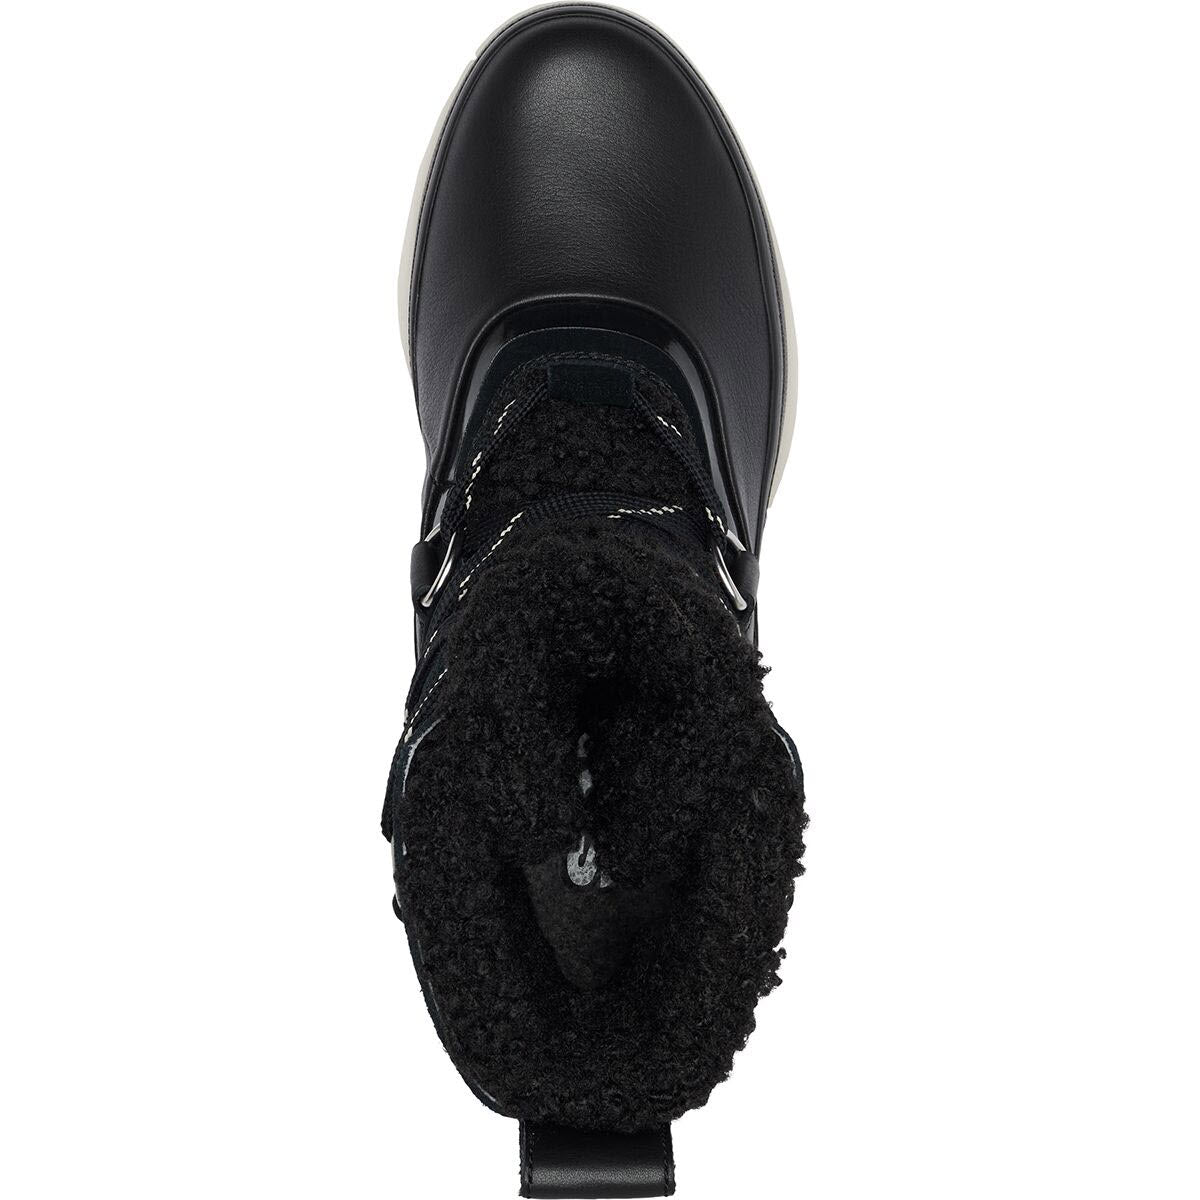 Top view of a waterproof black Sorel Joan of Arctic Next boot with laces and a thick, fuzzy lining.